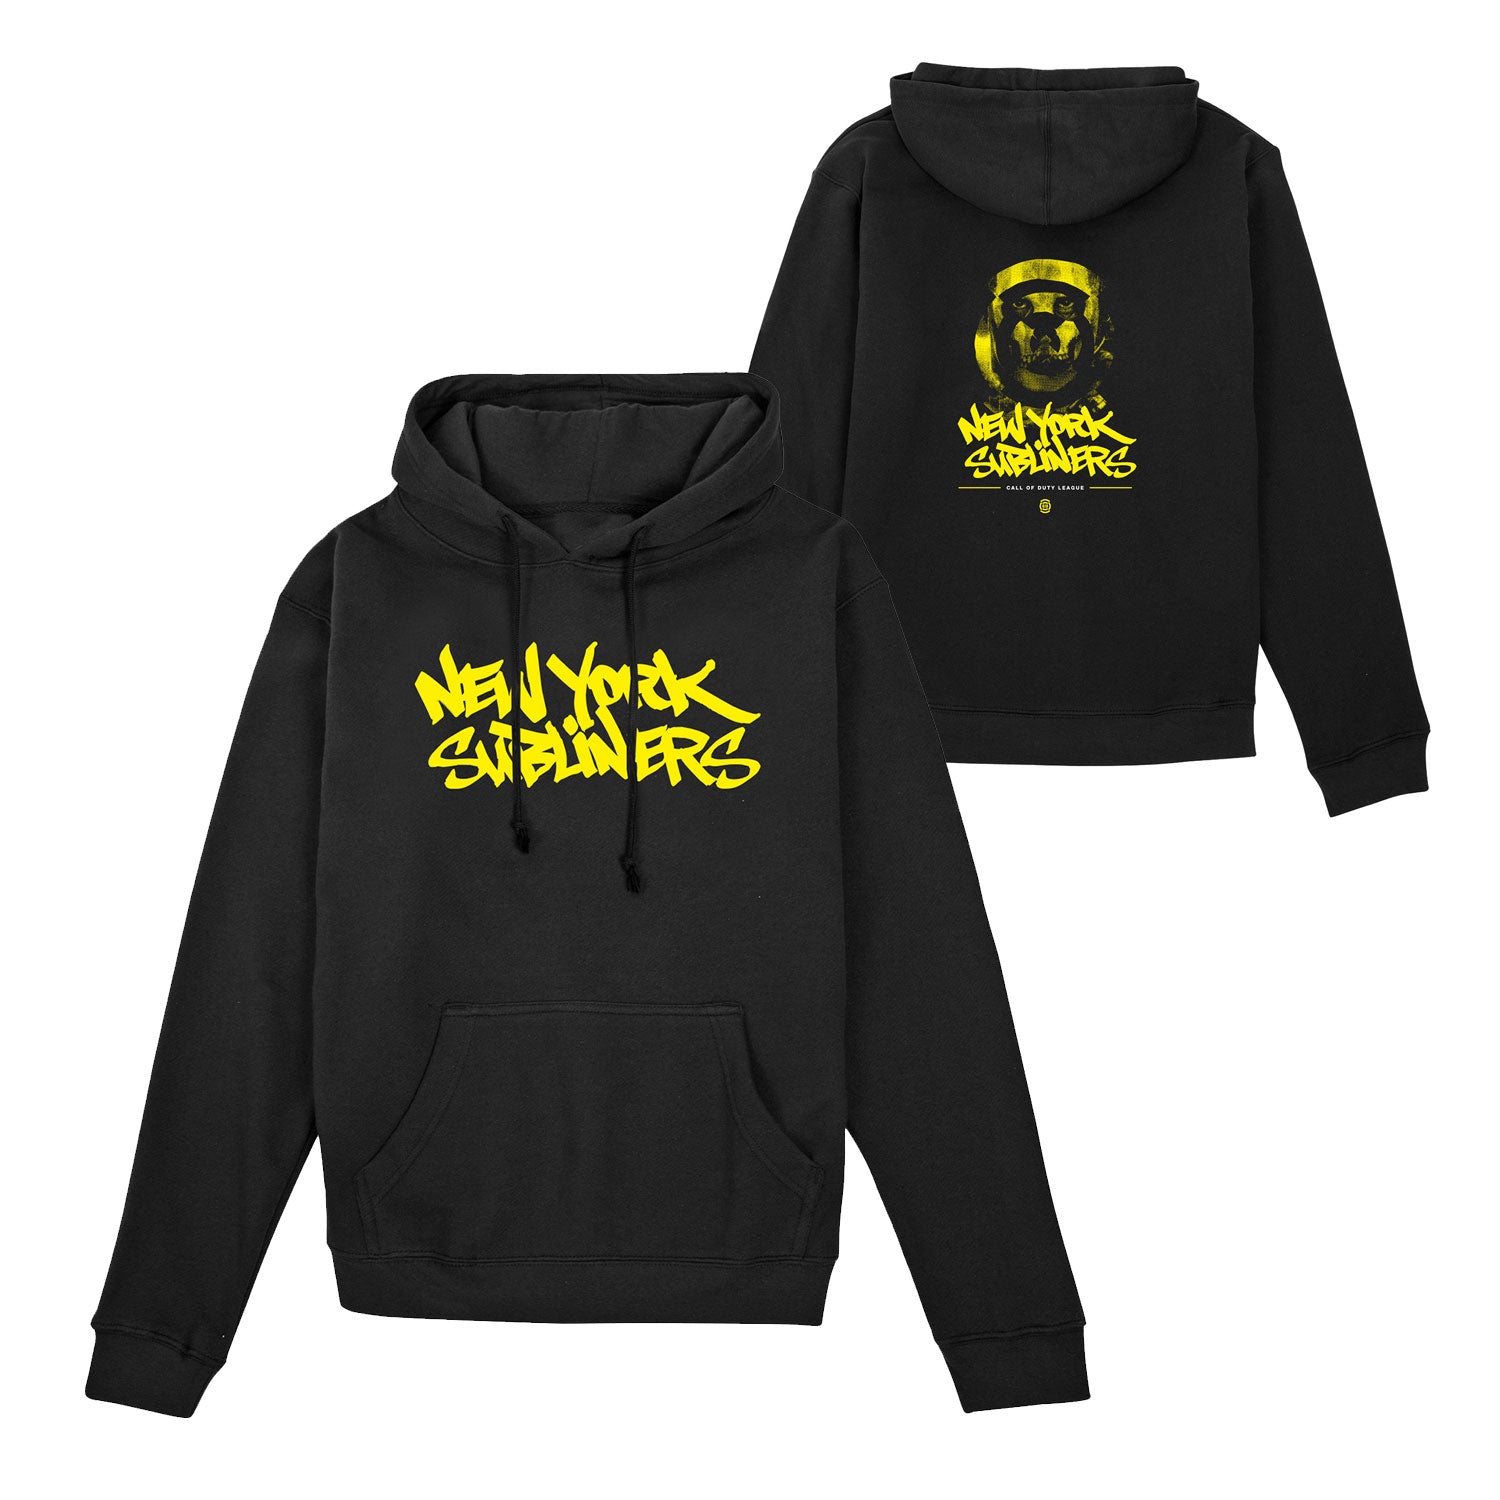 New York Subliners Ghost Logo Black Hoodie – Call of Duty League Shop